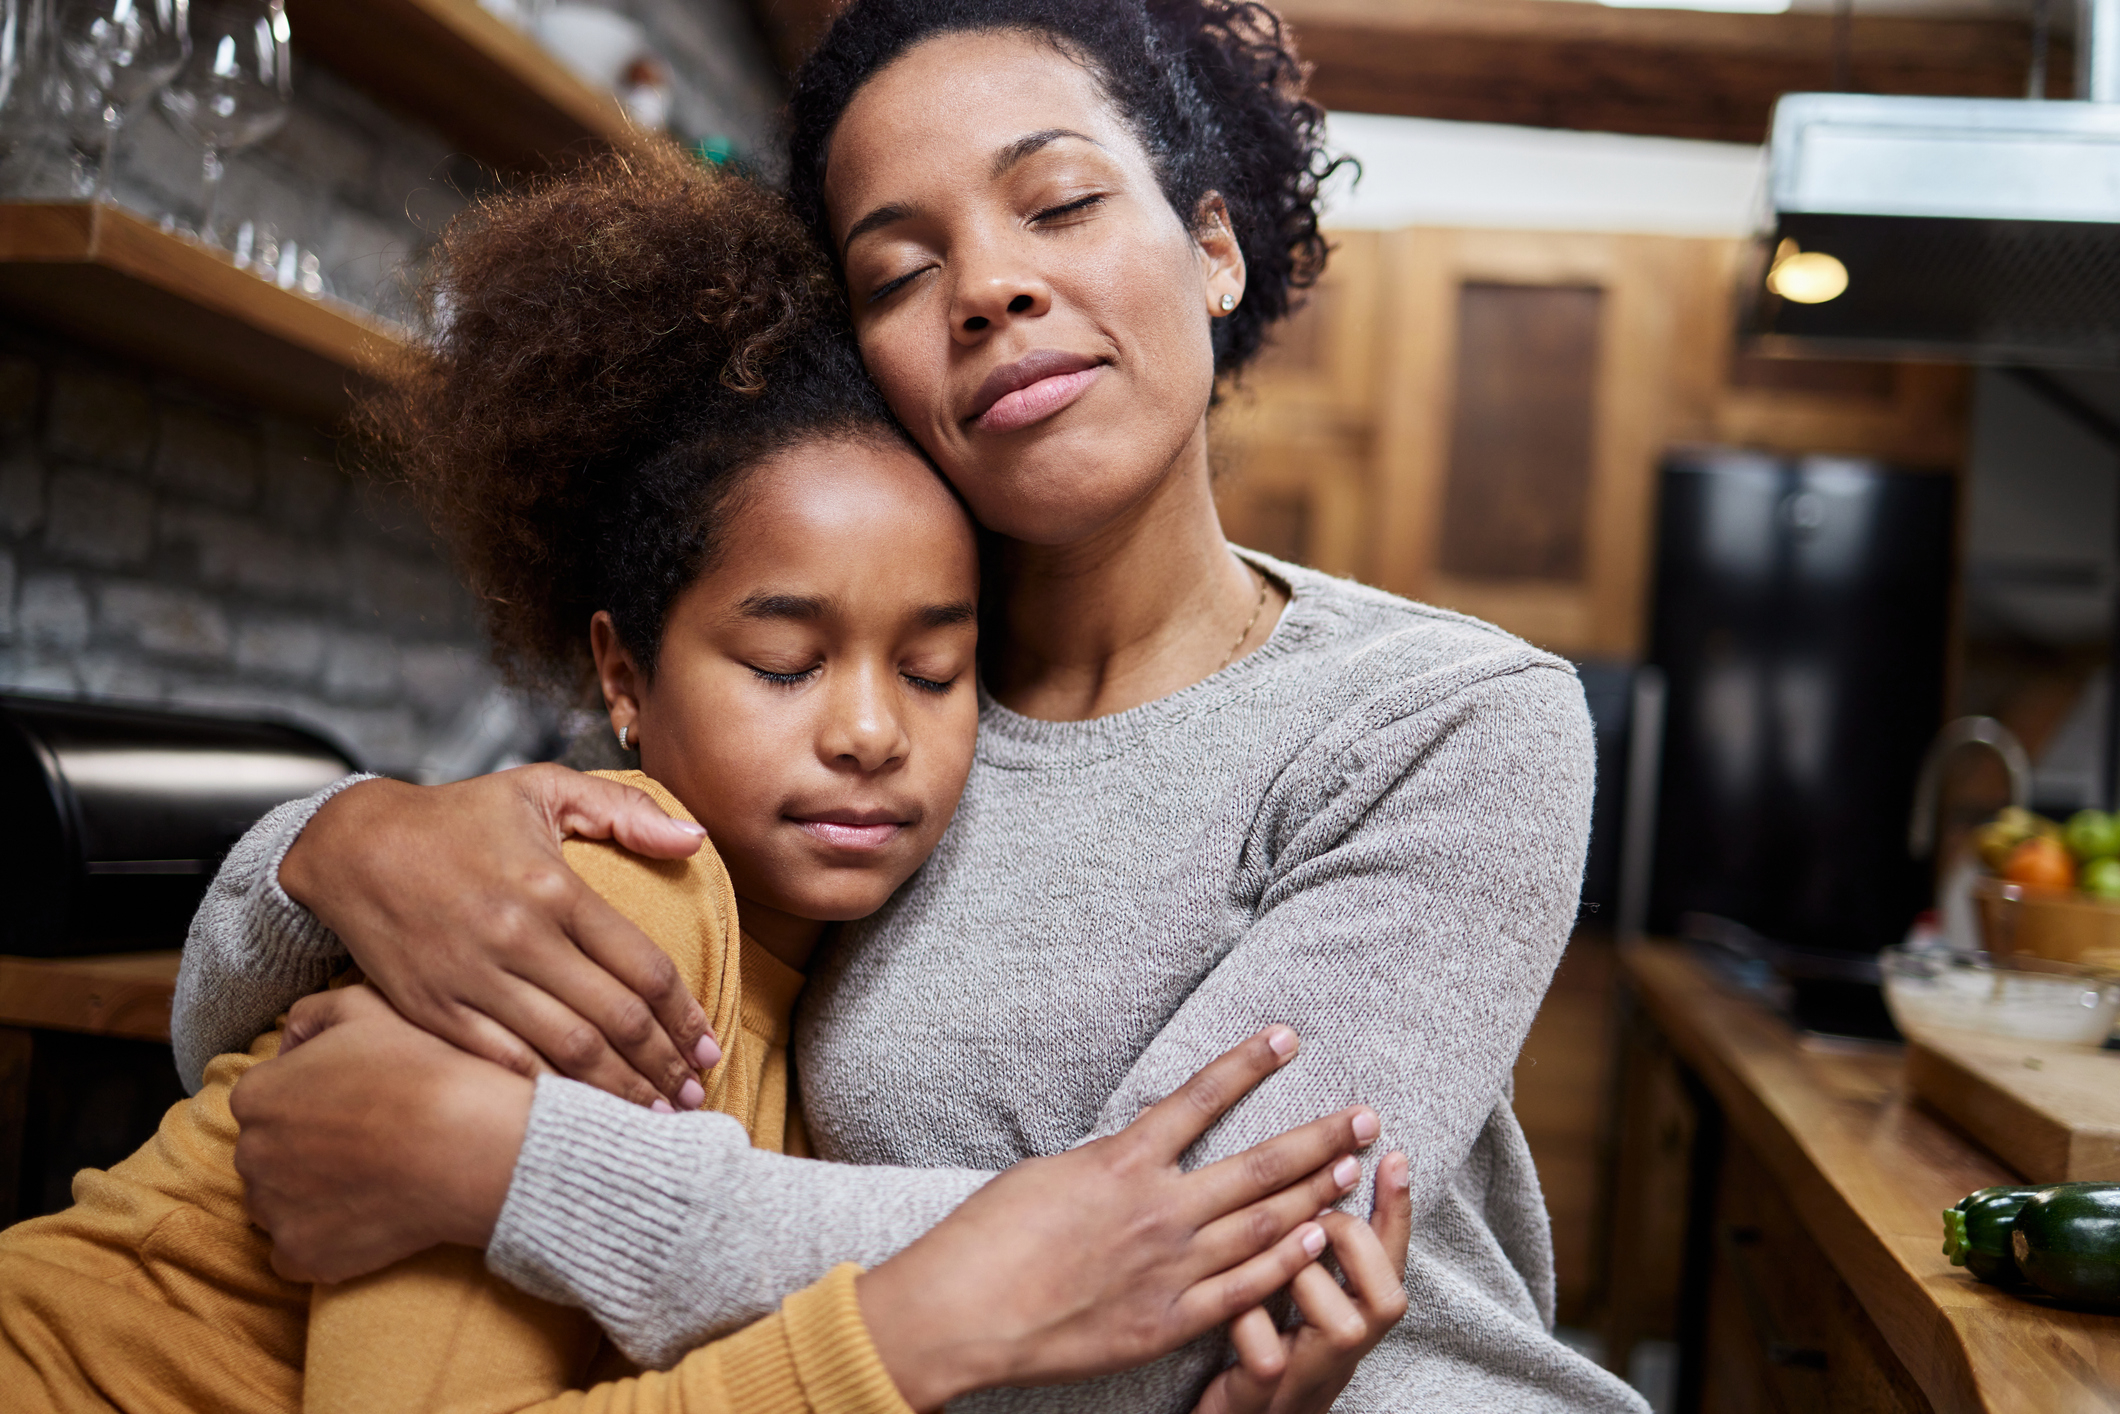 Mom and daughter embracing each other in a kitchen setting, eyes closed, showing a moment of affection